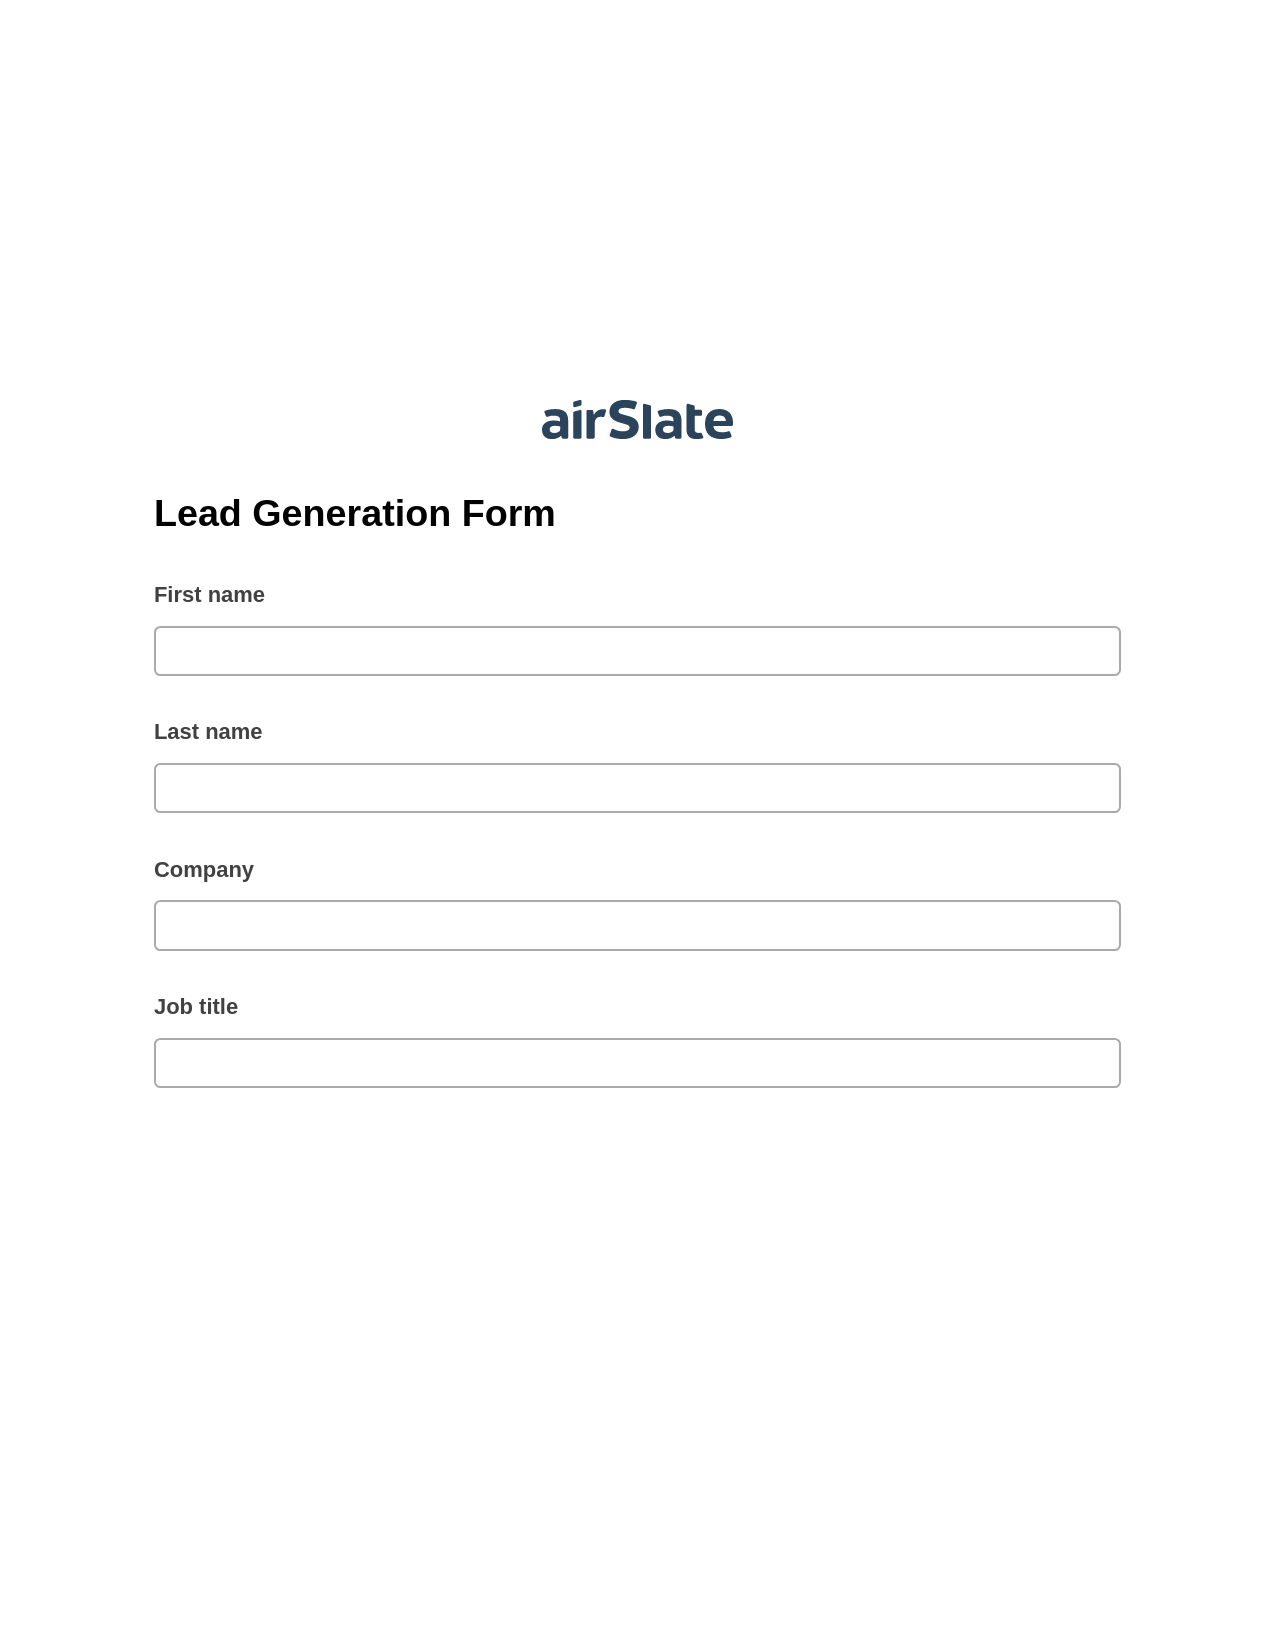 Lead Generation Form Pre-fill Dropdowns from Airtable, Remove Slate Bot, Archive to OneDrive Bot